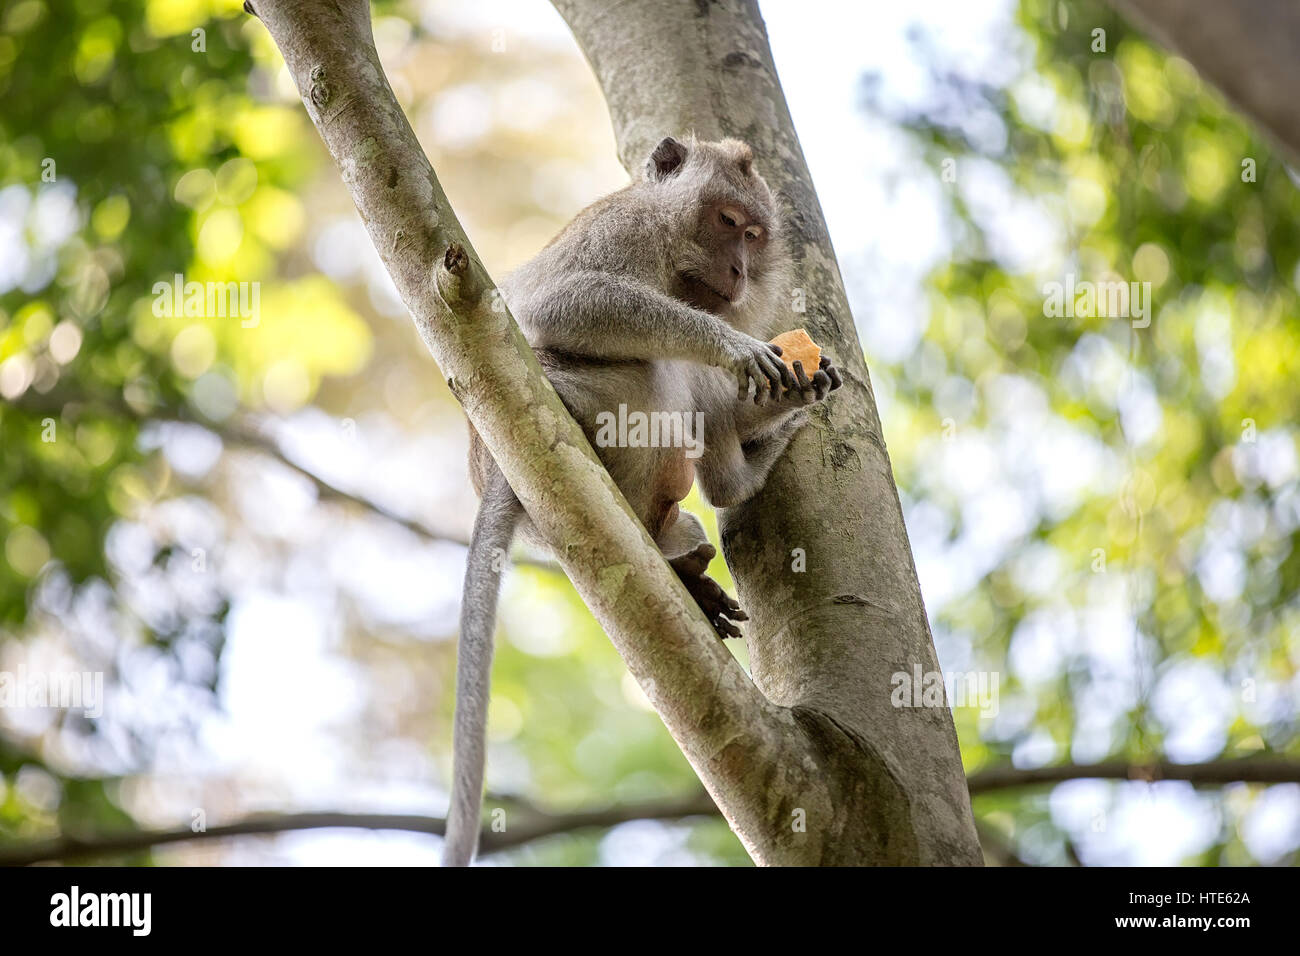 Long-tailed monkey on tree sitting on a branch and eating in the rainy forest Stock Photo